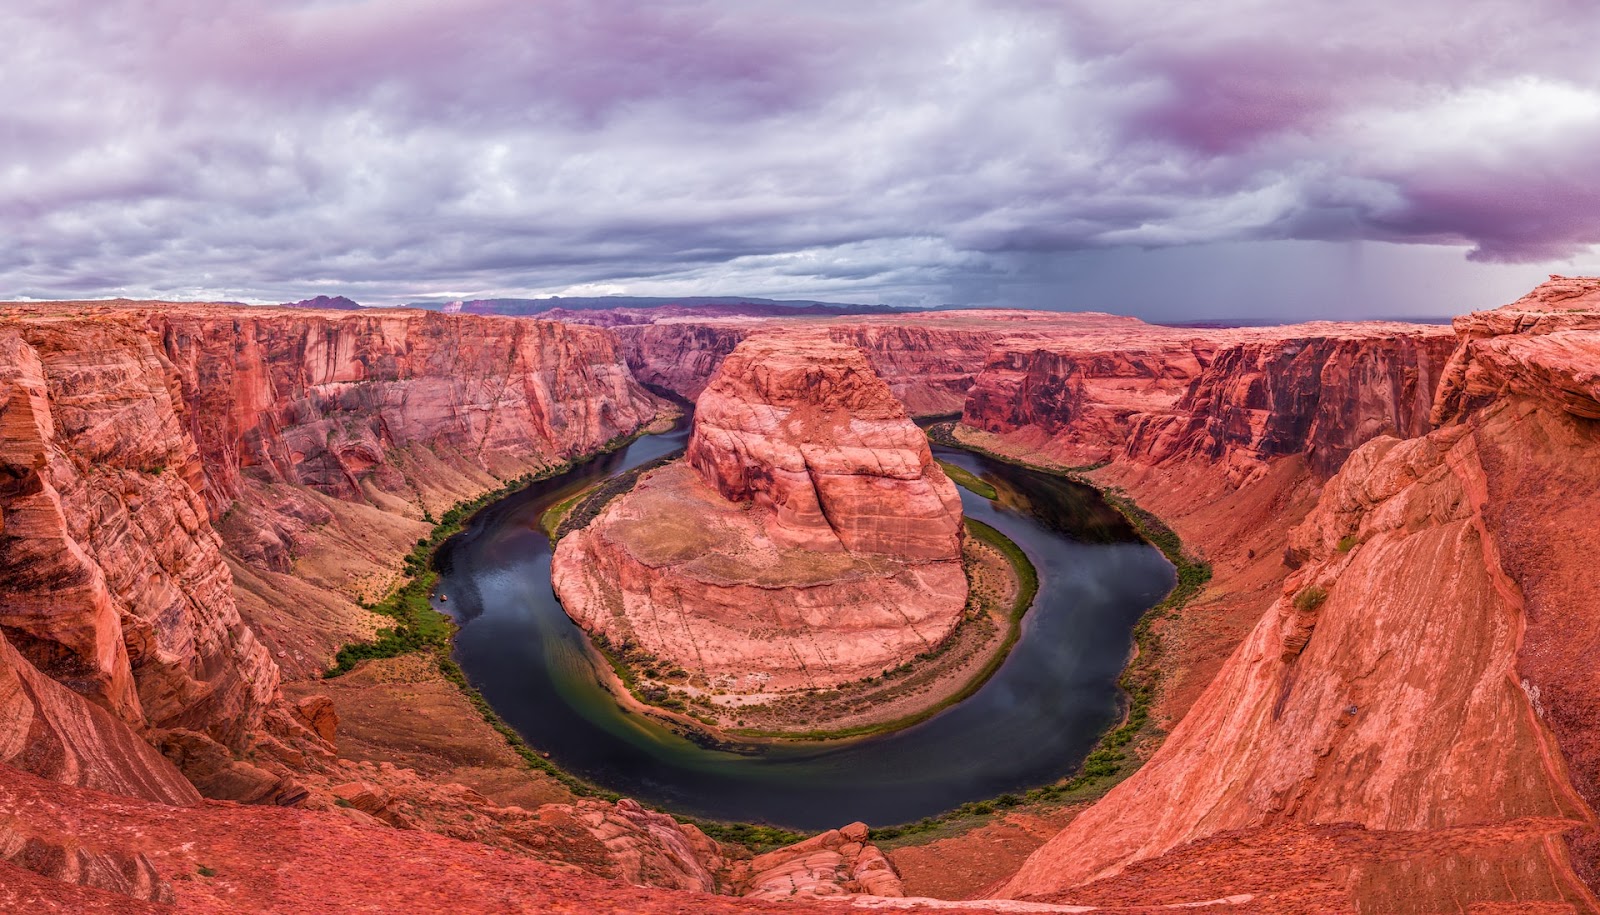 Visit Horseshoe Bend on your next Four Corners Road Trip.